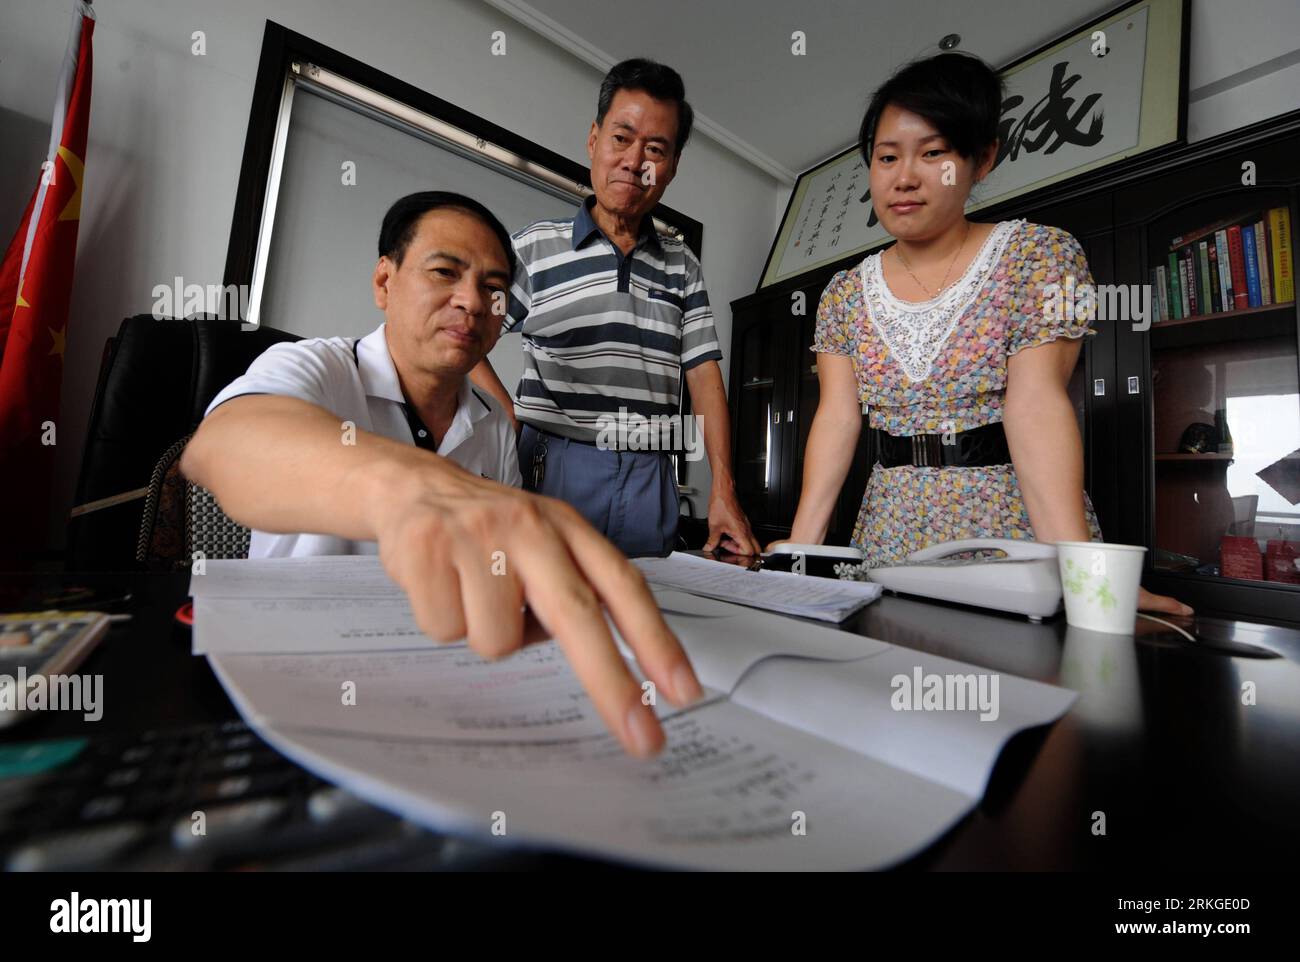 Bildnummer: 55584677  Datum: 06.07.2011  Copyright: imago/Xinhua (110711) -- HANGZHOU, July 11, 2011 (Xinhua) -- Fang Peilin, a local private lender, discusses business with his employees in his financing company in Wenzhou, east China s Zhejiang Province, July 6, 2011. Small and medium enterprises (SME) in Zhejiang struggle hard amid tightening monetary policy and rising costs, as growing financial troubles among SMEs pose a challenge to Chinese economy. In the current context of government credit tightening, the financing cost of SMEs getting access to credit has been pushed high. The altern Stock Photo